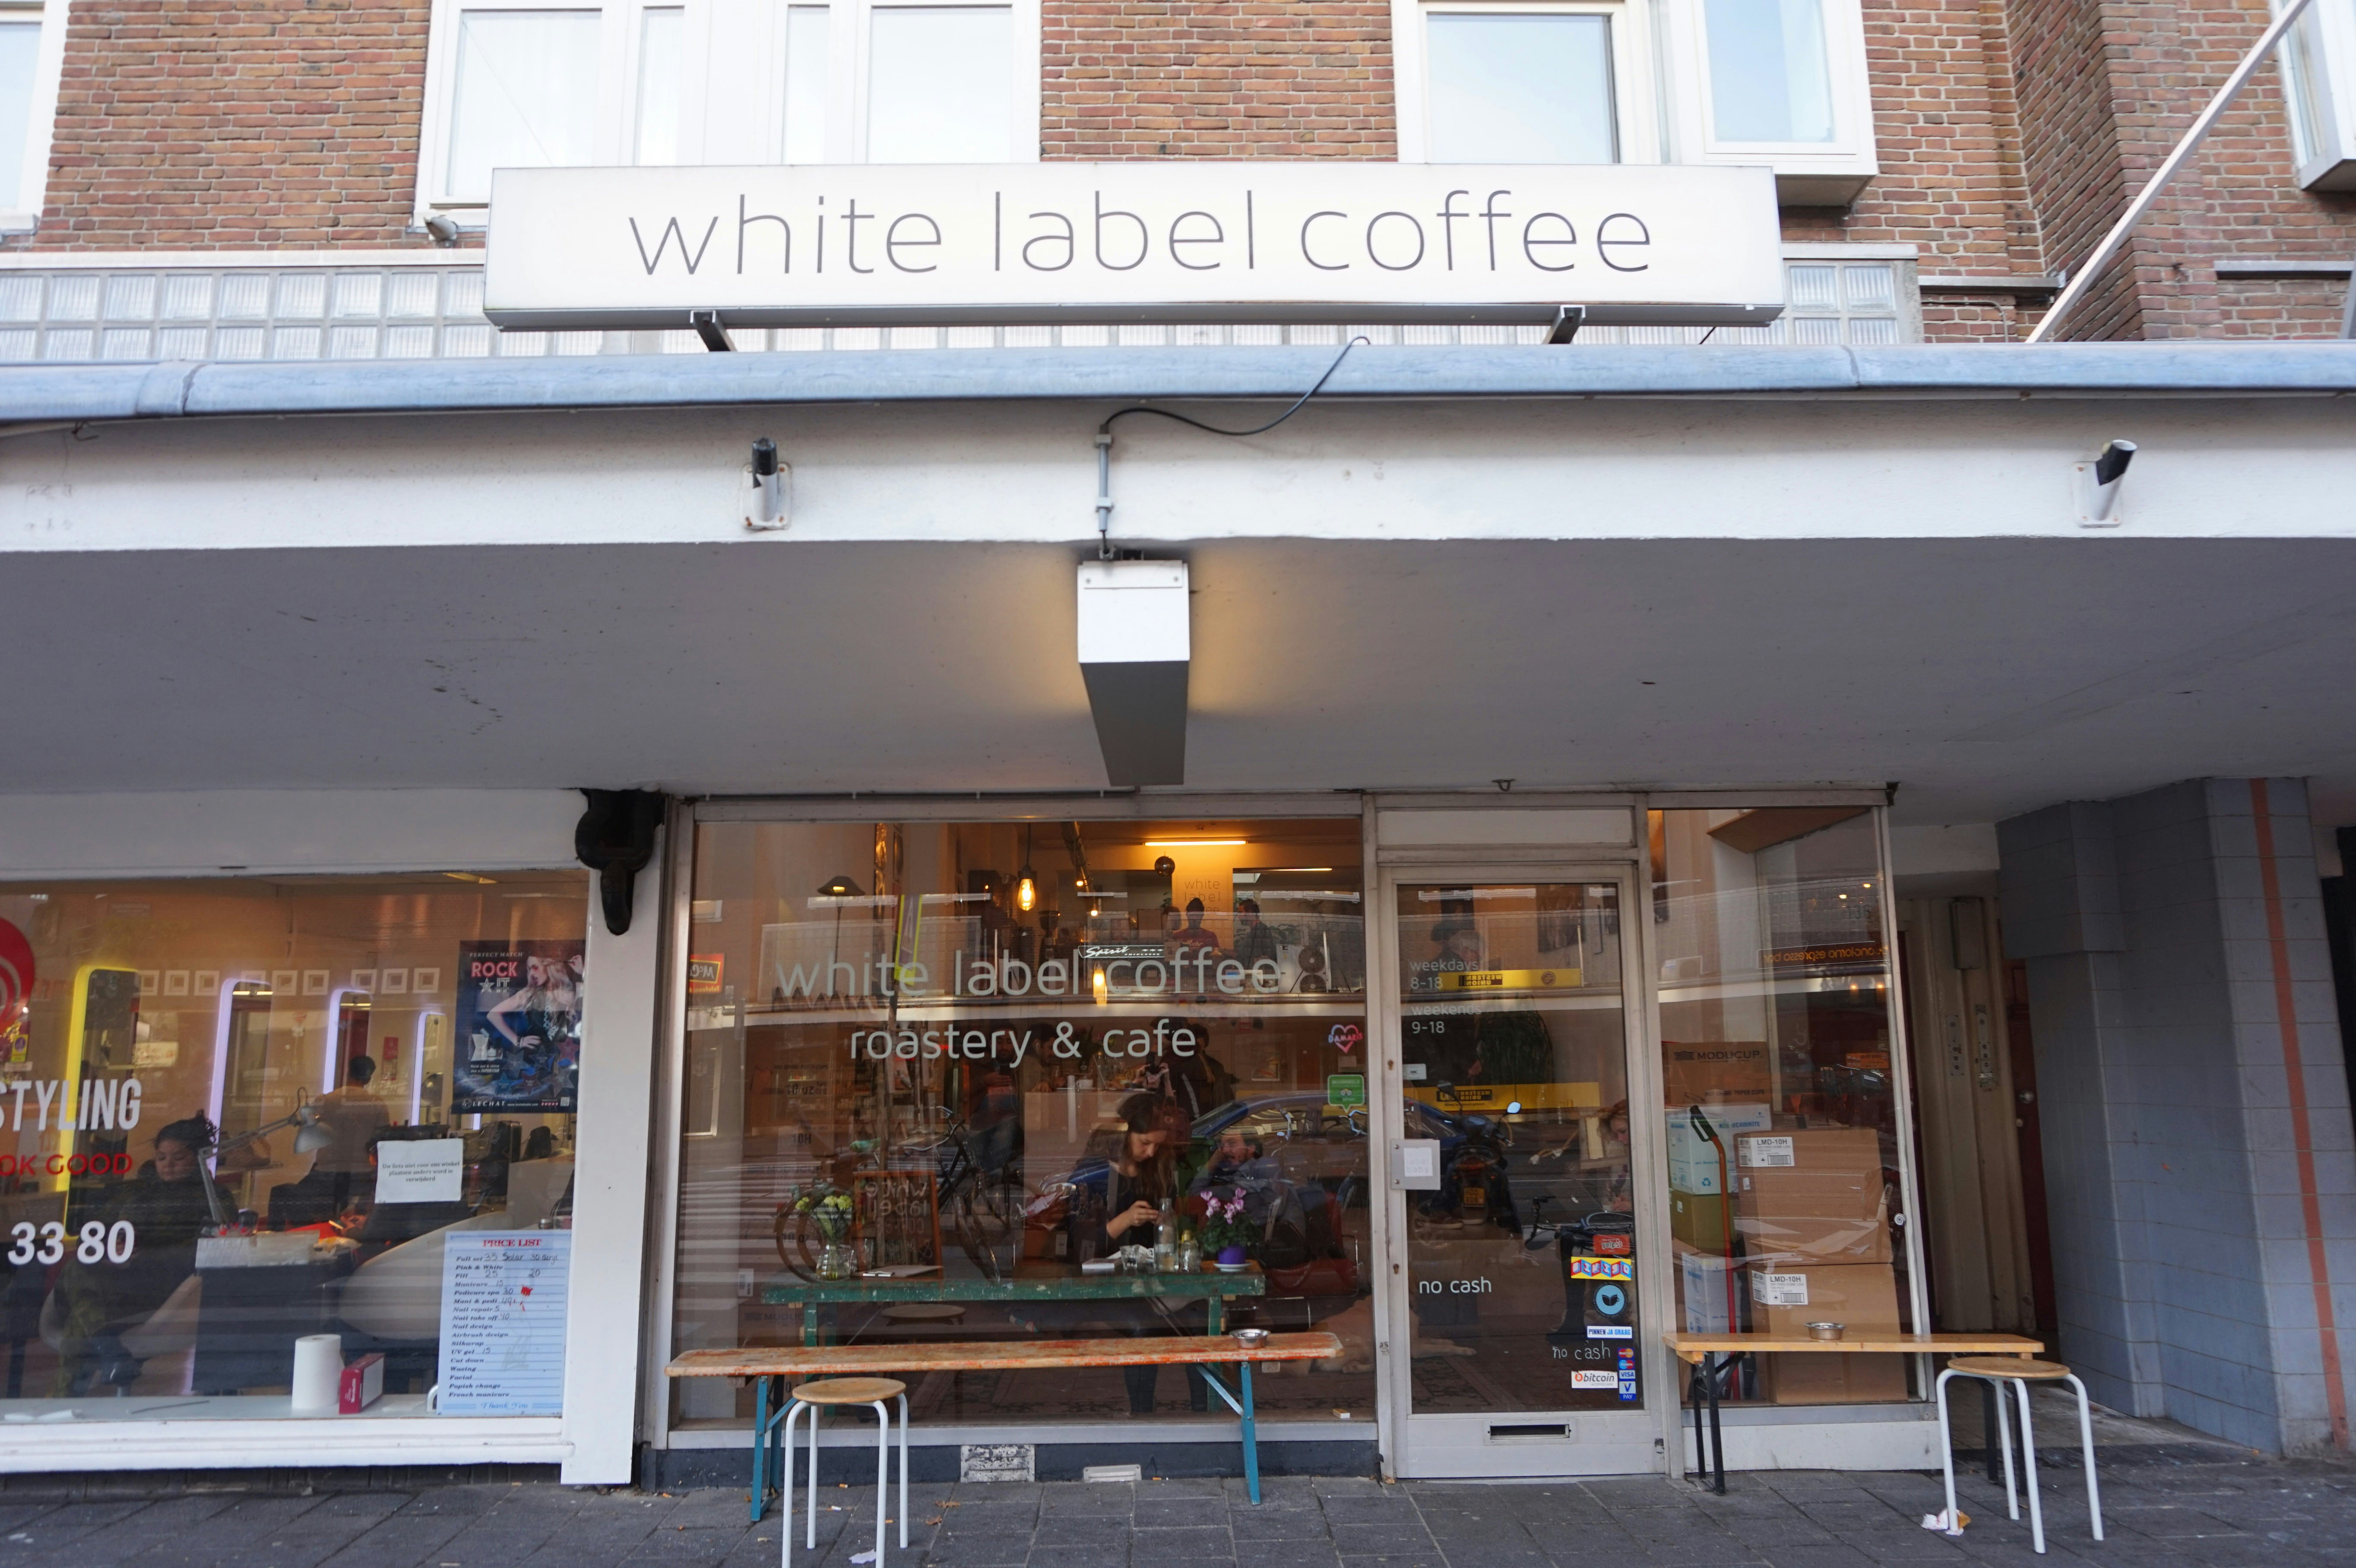 Rub shoulders with the local creatives at White Label Coffee